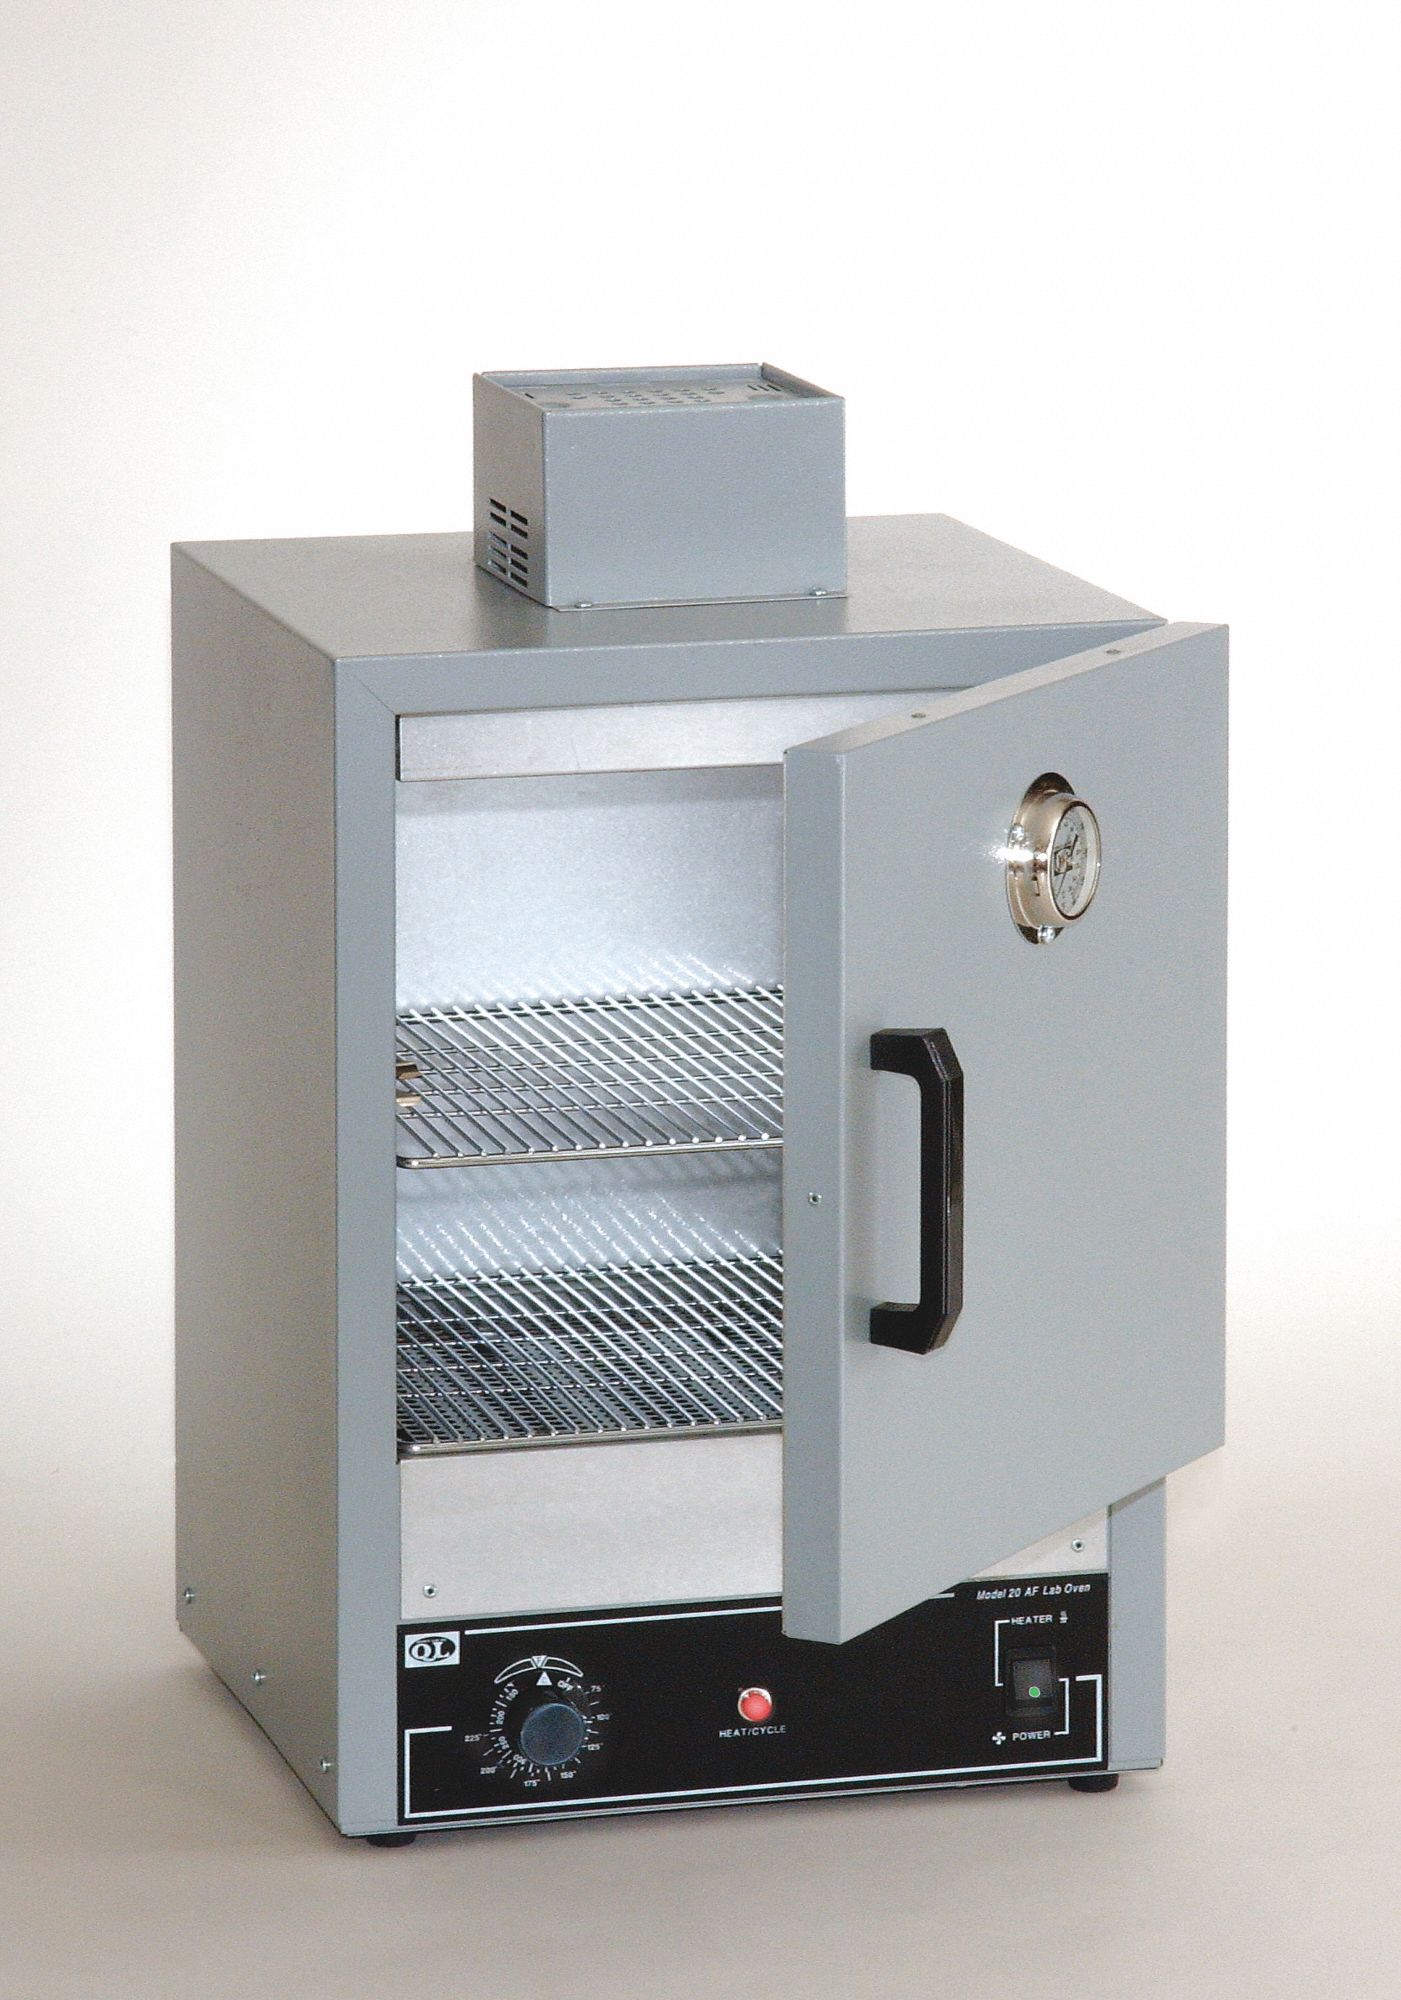 Analog Oven: Ambient 25° to 232°, 1.14 Capacity (Cu.-Ft.), 25.5 in Overall Ht, +/- 6°F